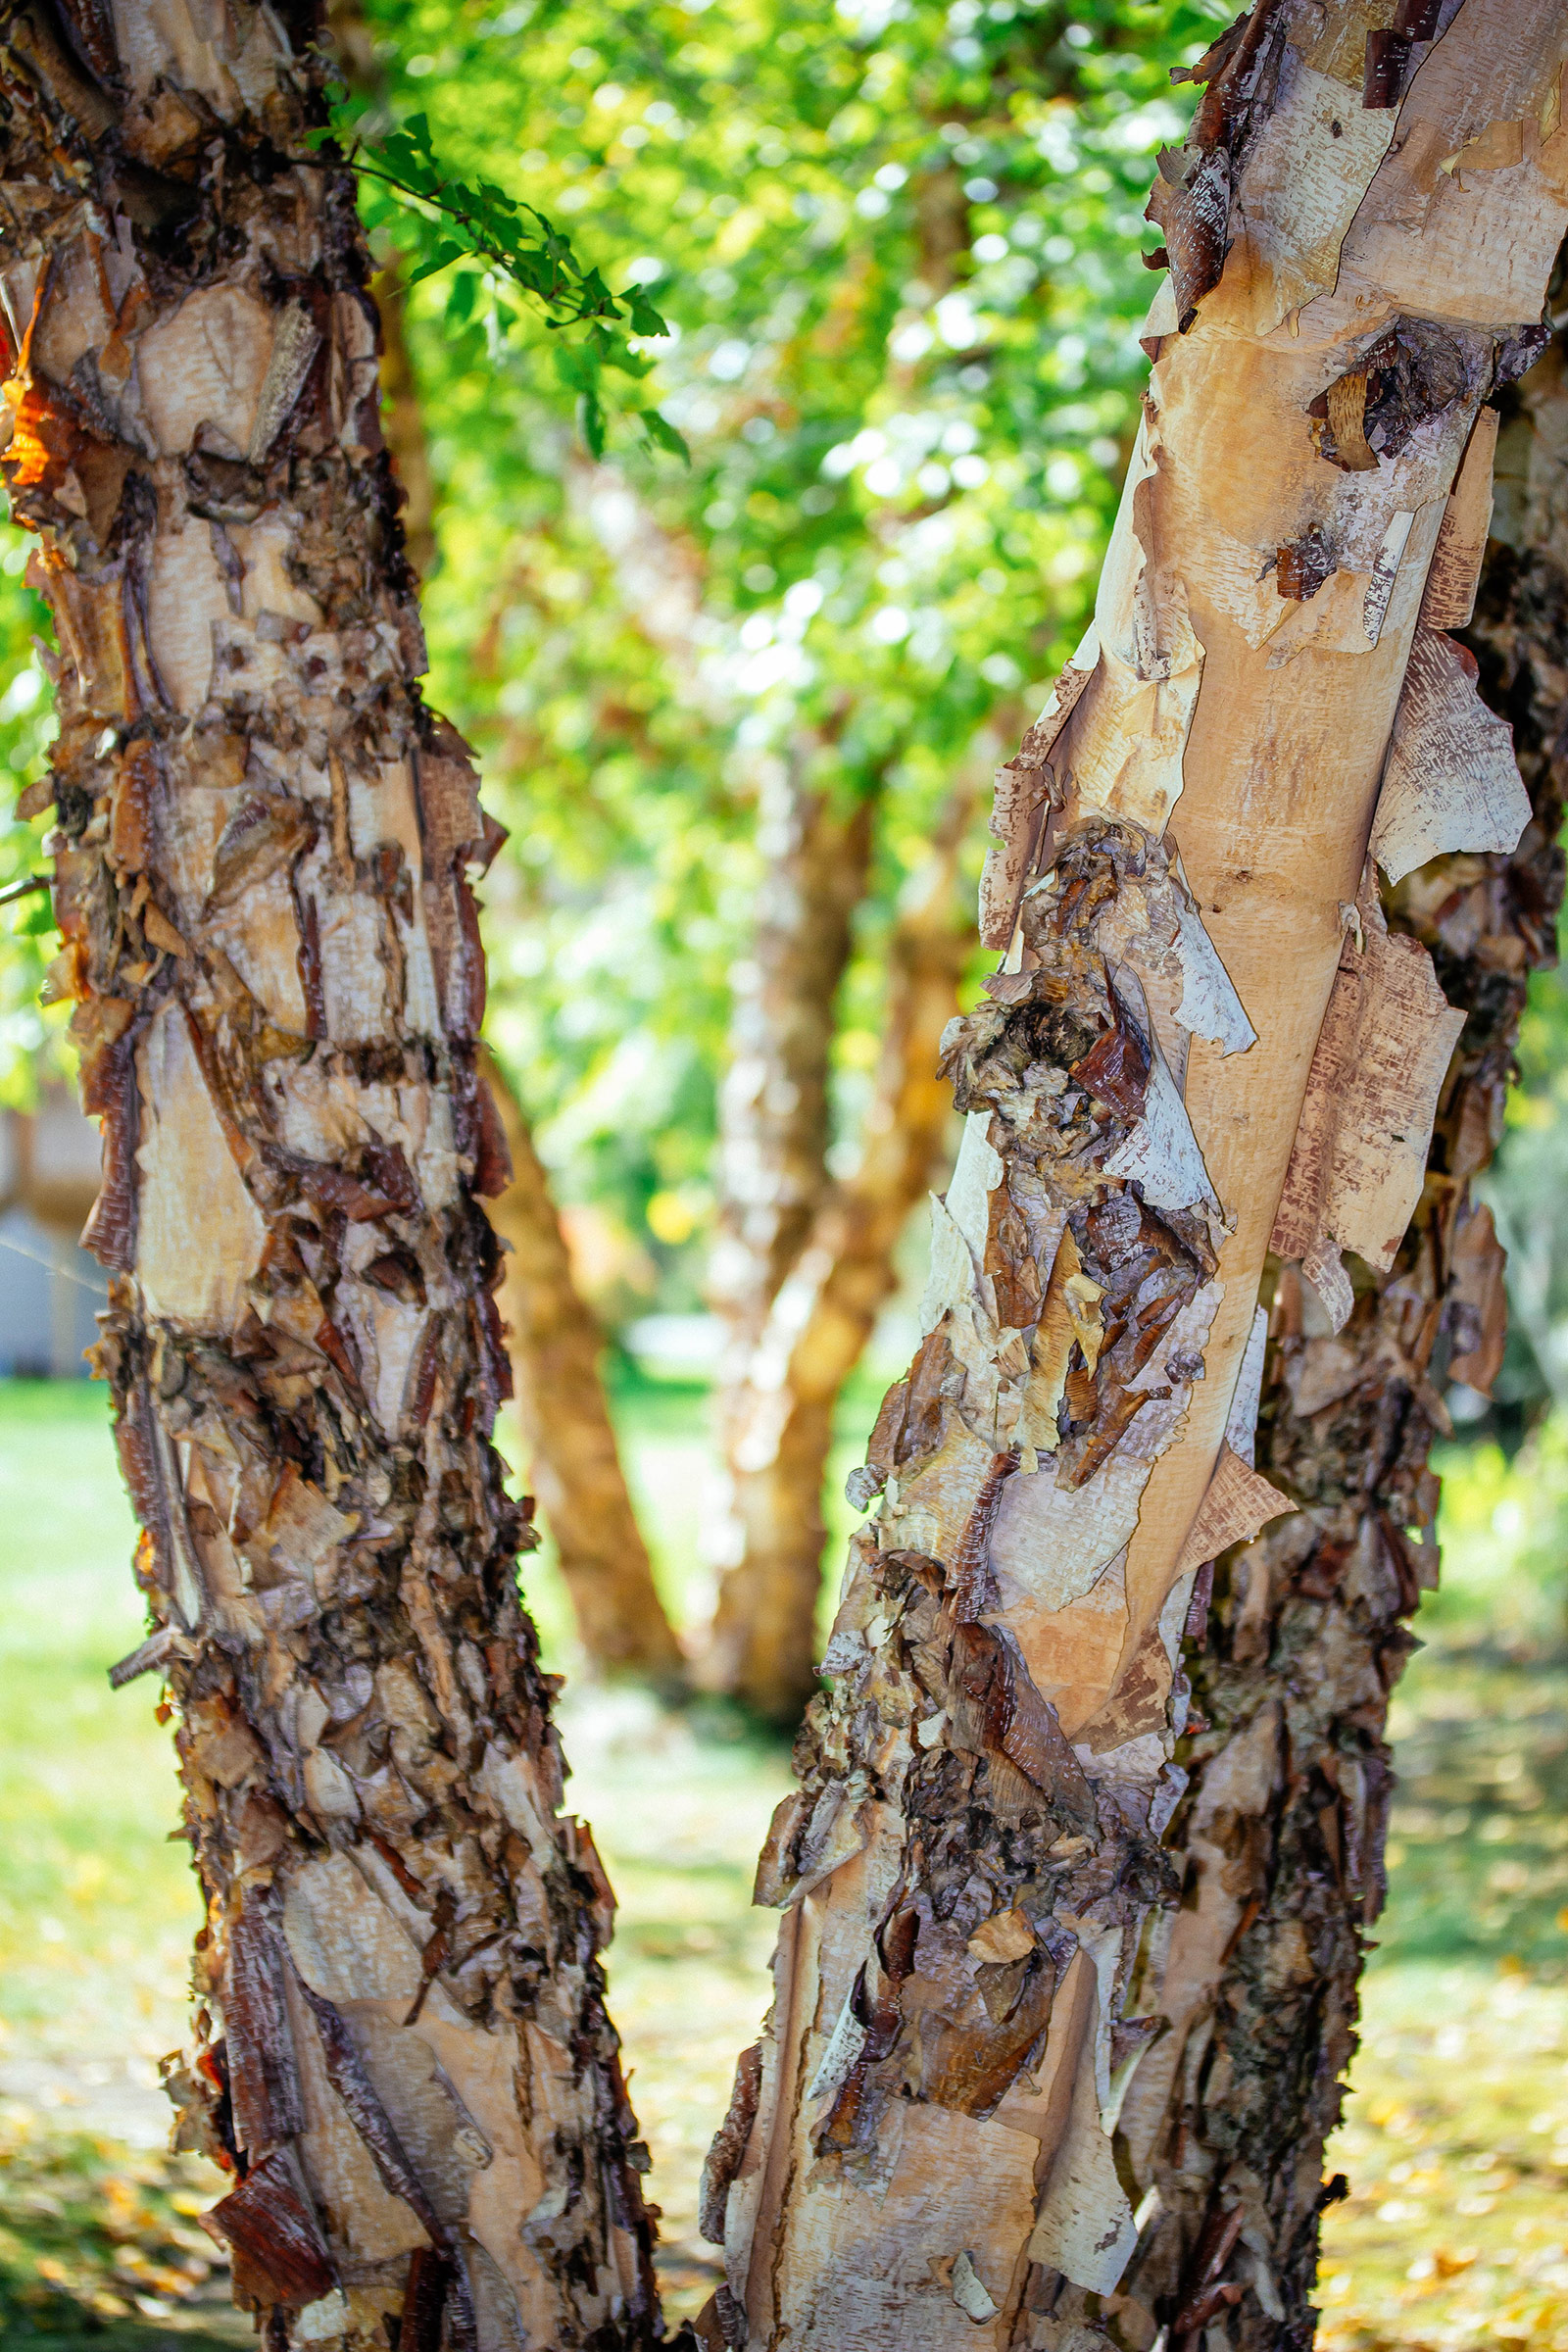 Close-up of fast-growing river birch tree trunks with peeling brown bark